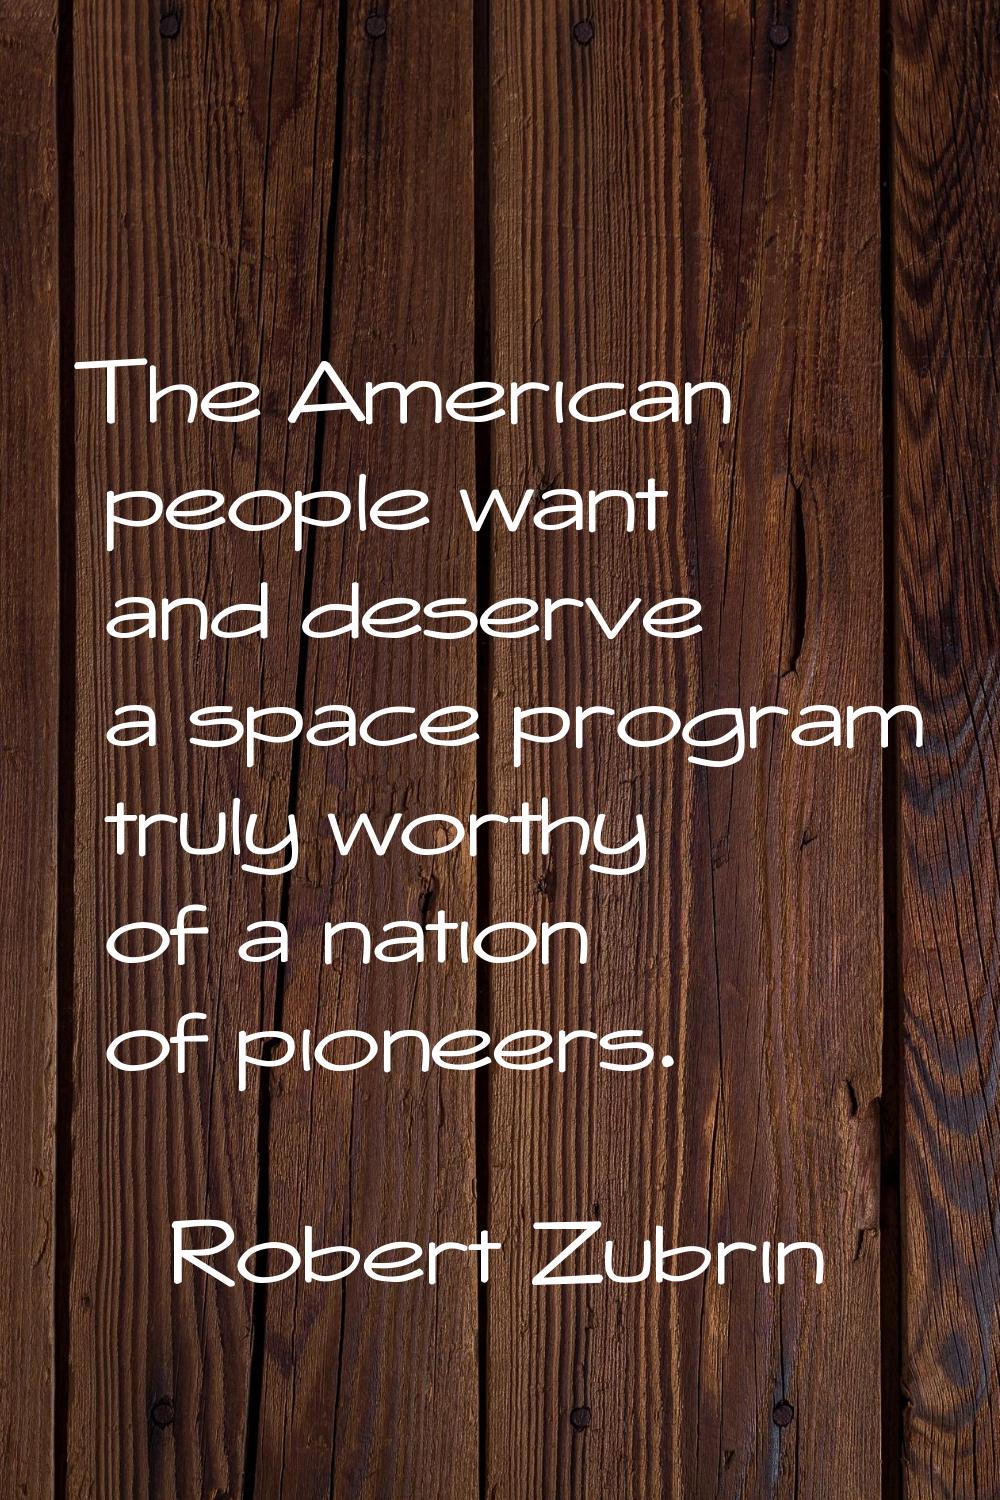 The American people want and deserve a space program truly worthy of a nation of pioneers.